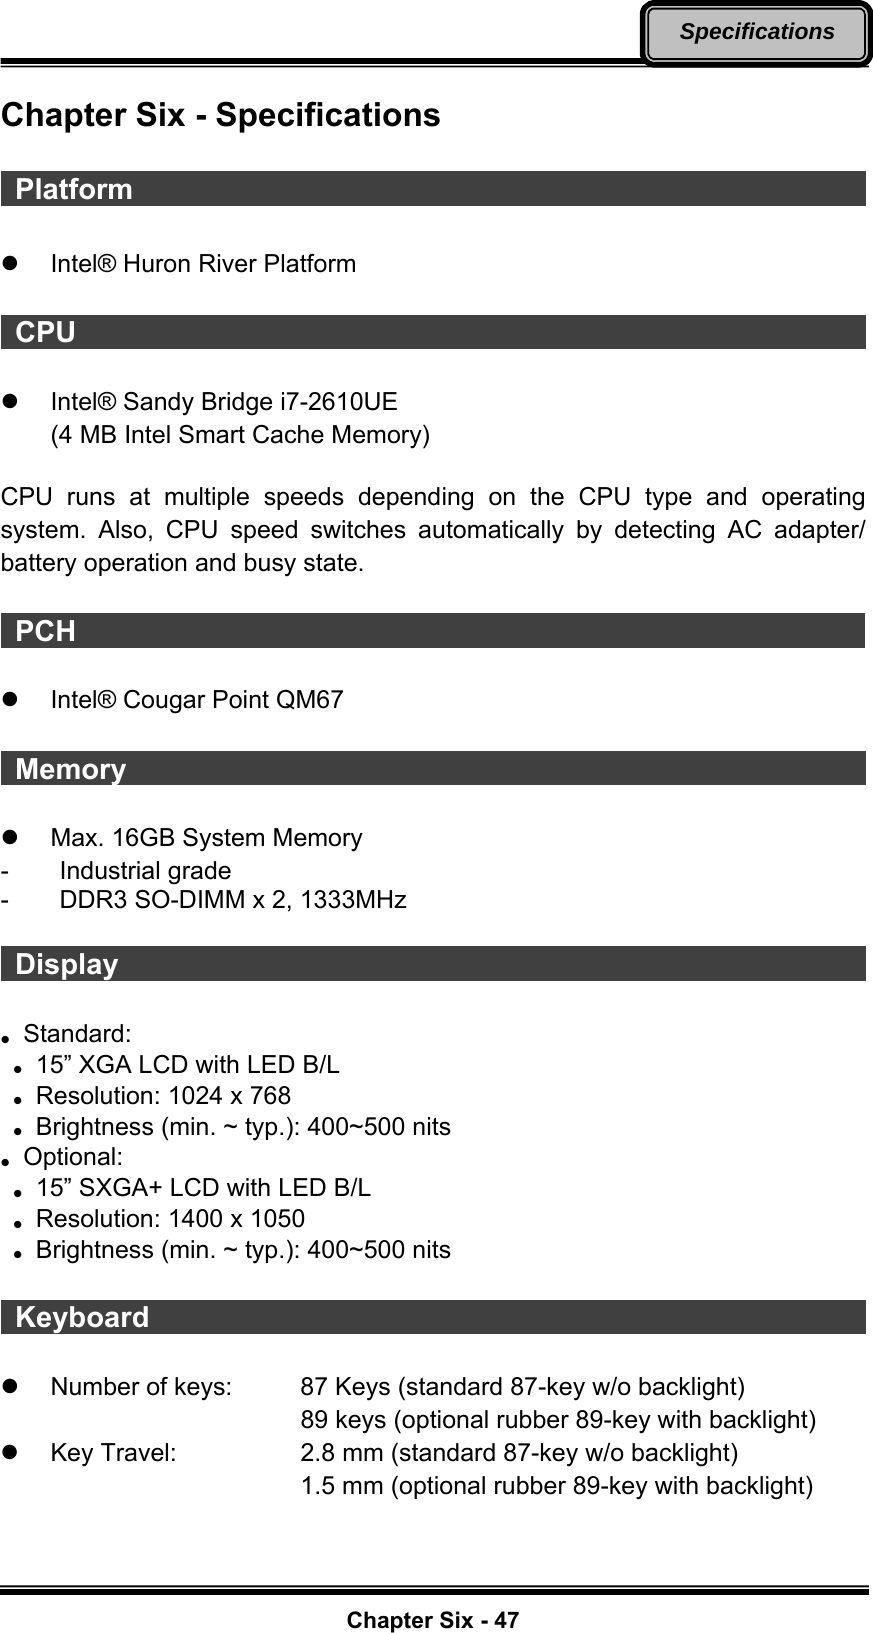   Chapter Six - 47Specifications Chapter Six - Specifications   Platform                                                        z  Intel® Huron River Platform   CPU                                                         z  Intel® Sandy Bridge i7-2610UE (4 MB Intel Smart Cache Memory)  CPU runs at multiple speeds depending on the CPU type and operating system. Also, CPU speed switches automatically by detecting AC adapter/ battery operation and busy state.   PCH                                                        z  Intel® Cougar Point QM67   Memory                                                       z  Max. 16GB System Memory   - Industrial grade -  DDR3 SO-DIMM x 2, 1333MHz   Display                                                        z Standard:  z   15” XGA LCD with LED B/L z   Resolution: 1024 x 768 z  Brightness (min. ~ typ.): 400~500 nits z Optional:  z   15” SXGA+ LCD with LED B/L z   Resolution: 1400 x 1050 z  Brightness (min. ~ typ.): 400~500 nits   Keyboard                                                    z  Number of keys:    87 Keys (standard 87-key w/o backlight) 89 keys (optional rubber 89-key with backlight) z  Key Travel:      2.8 mm (standard 87-key w/o backlight) 1.5 mm (optional rubber 89-key with backlight) 